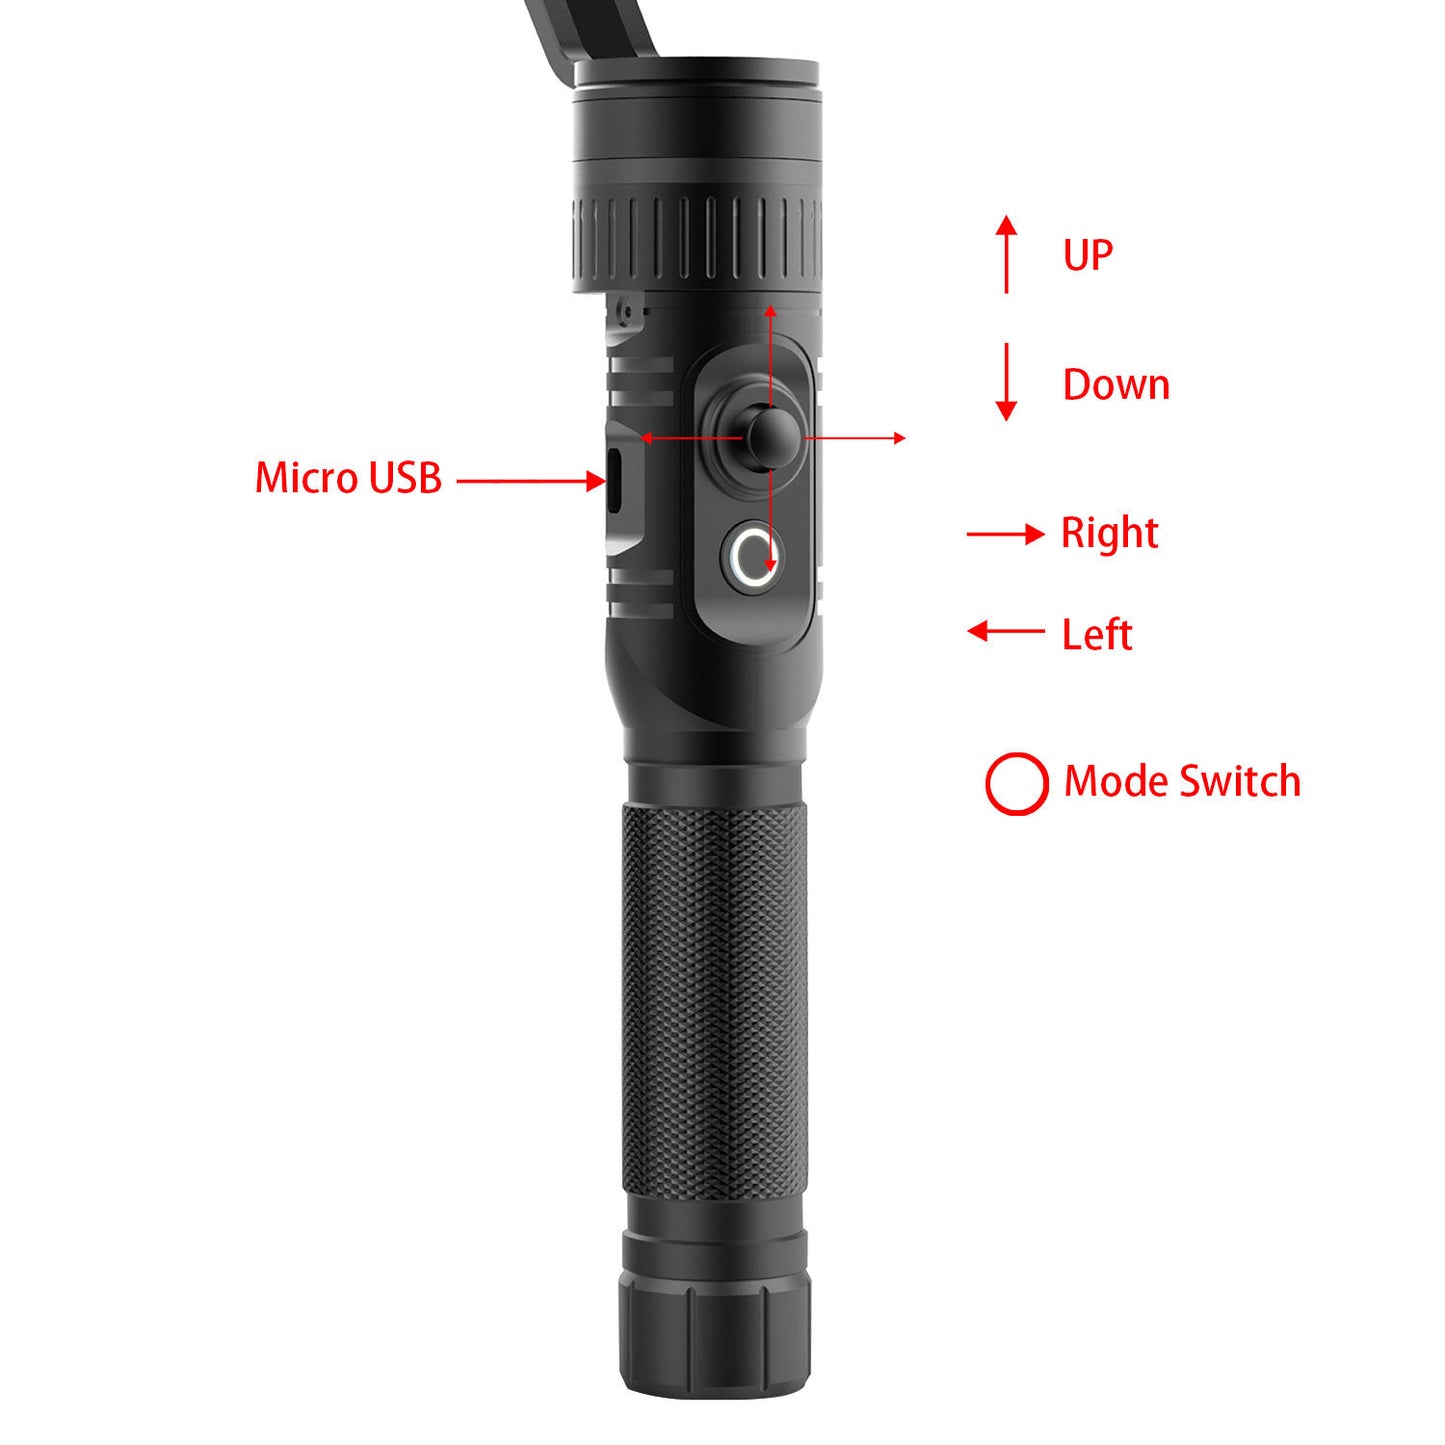 3-Axis Handheld Gimbal Stabilizer for Smartphones up to 6'